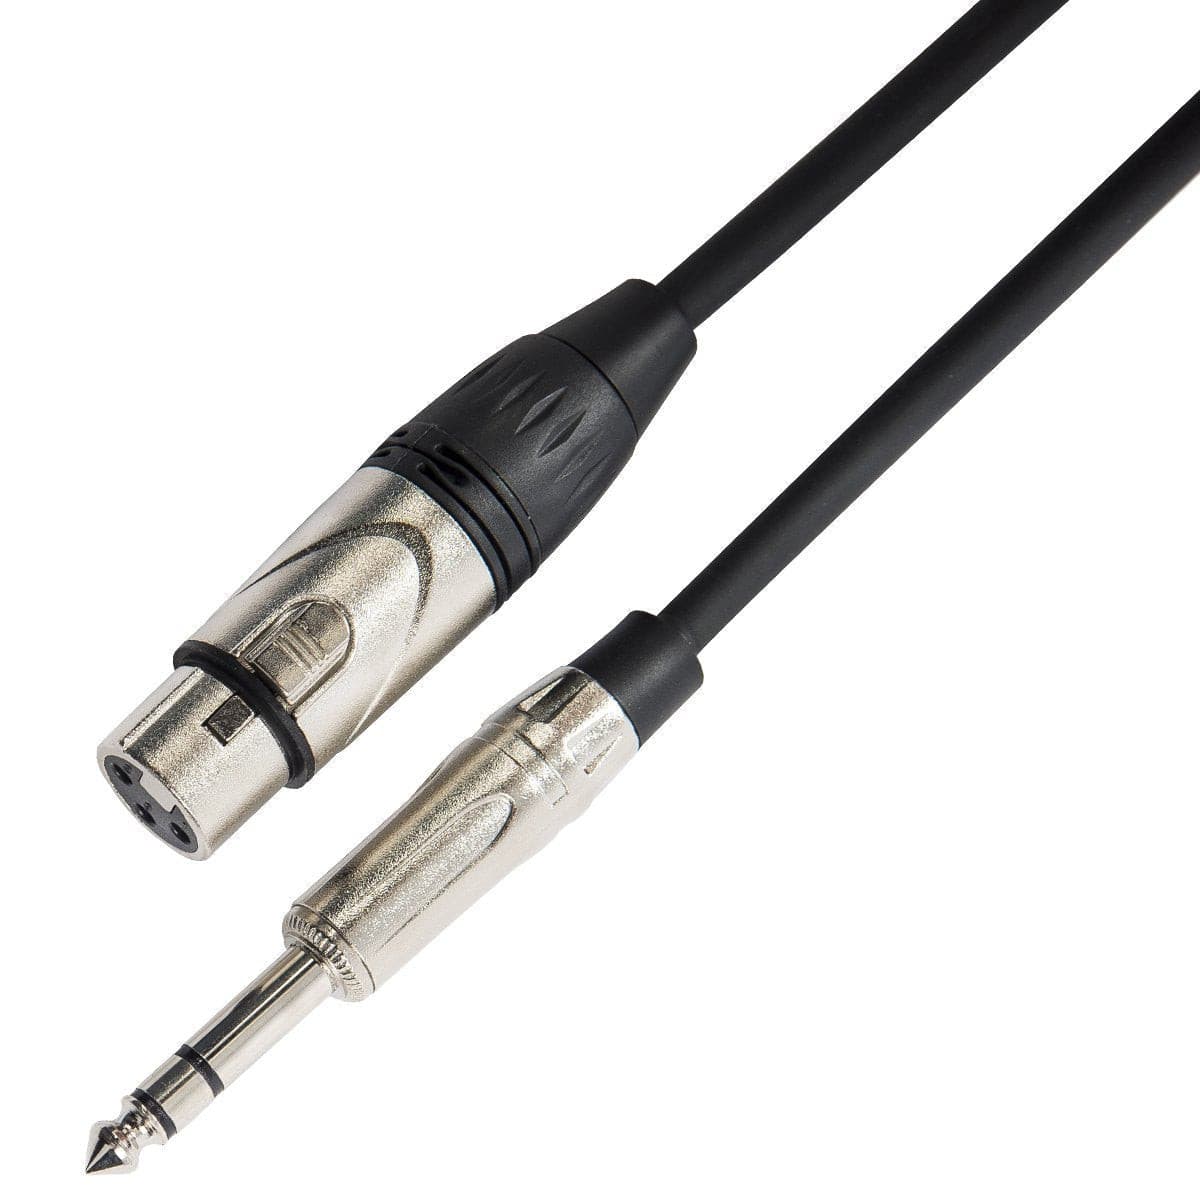 Kinsman Deluxe Stereo Microphone Cable - 10ft/3m, Cables, Microphones & Headphones for sale at Richards Guitars.